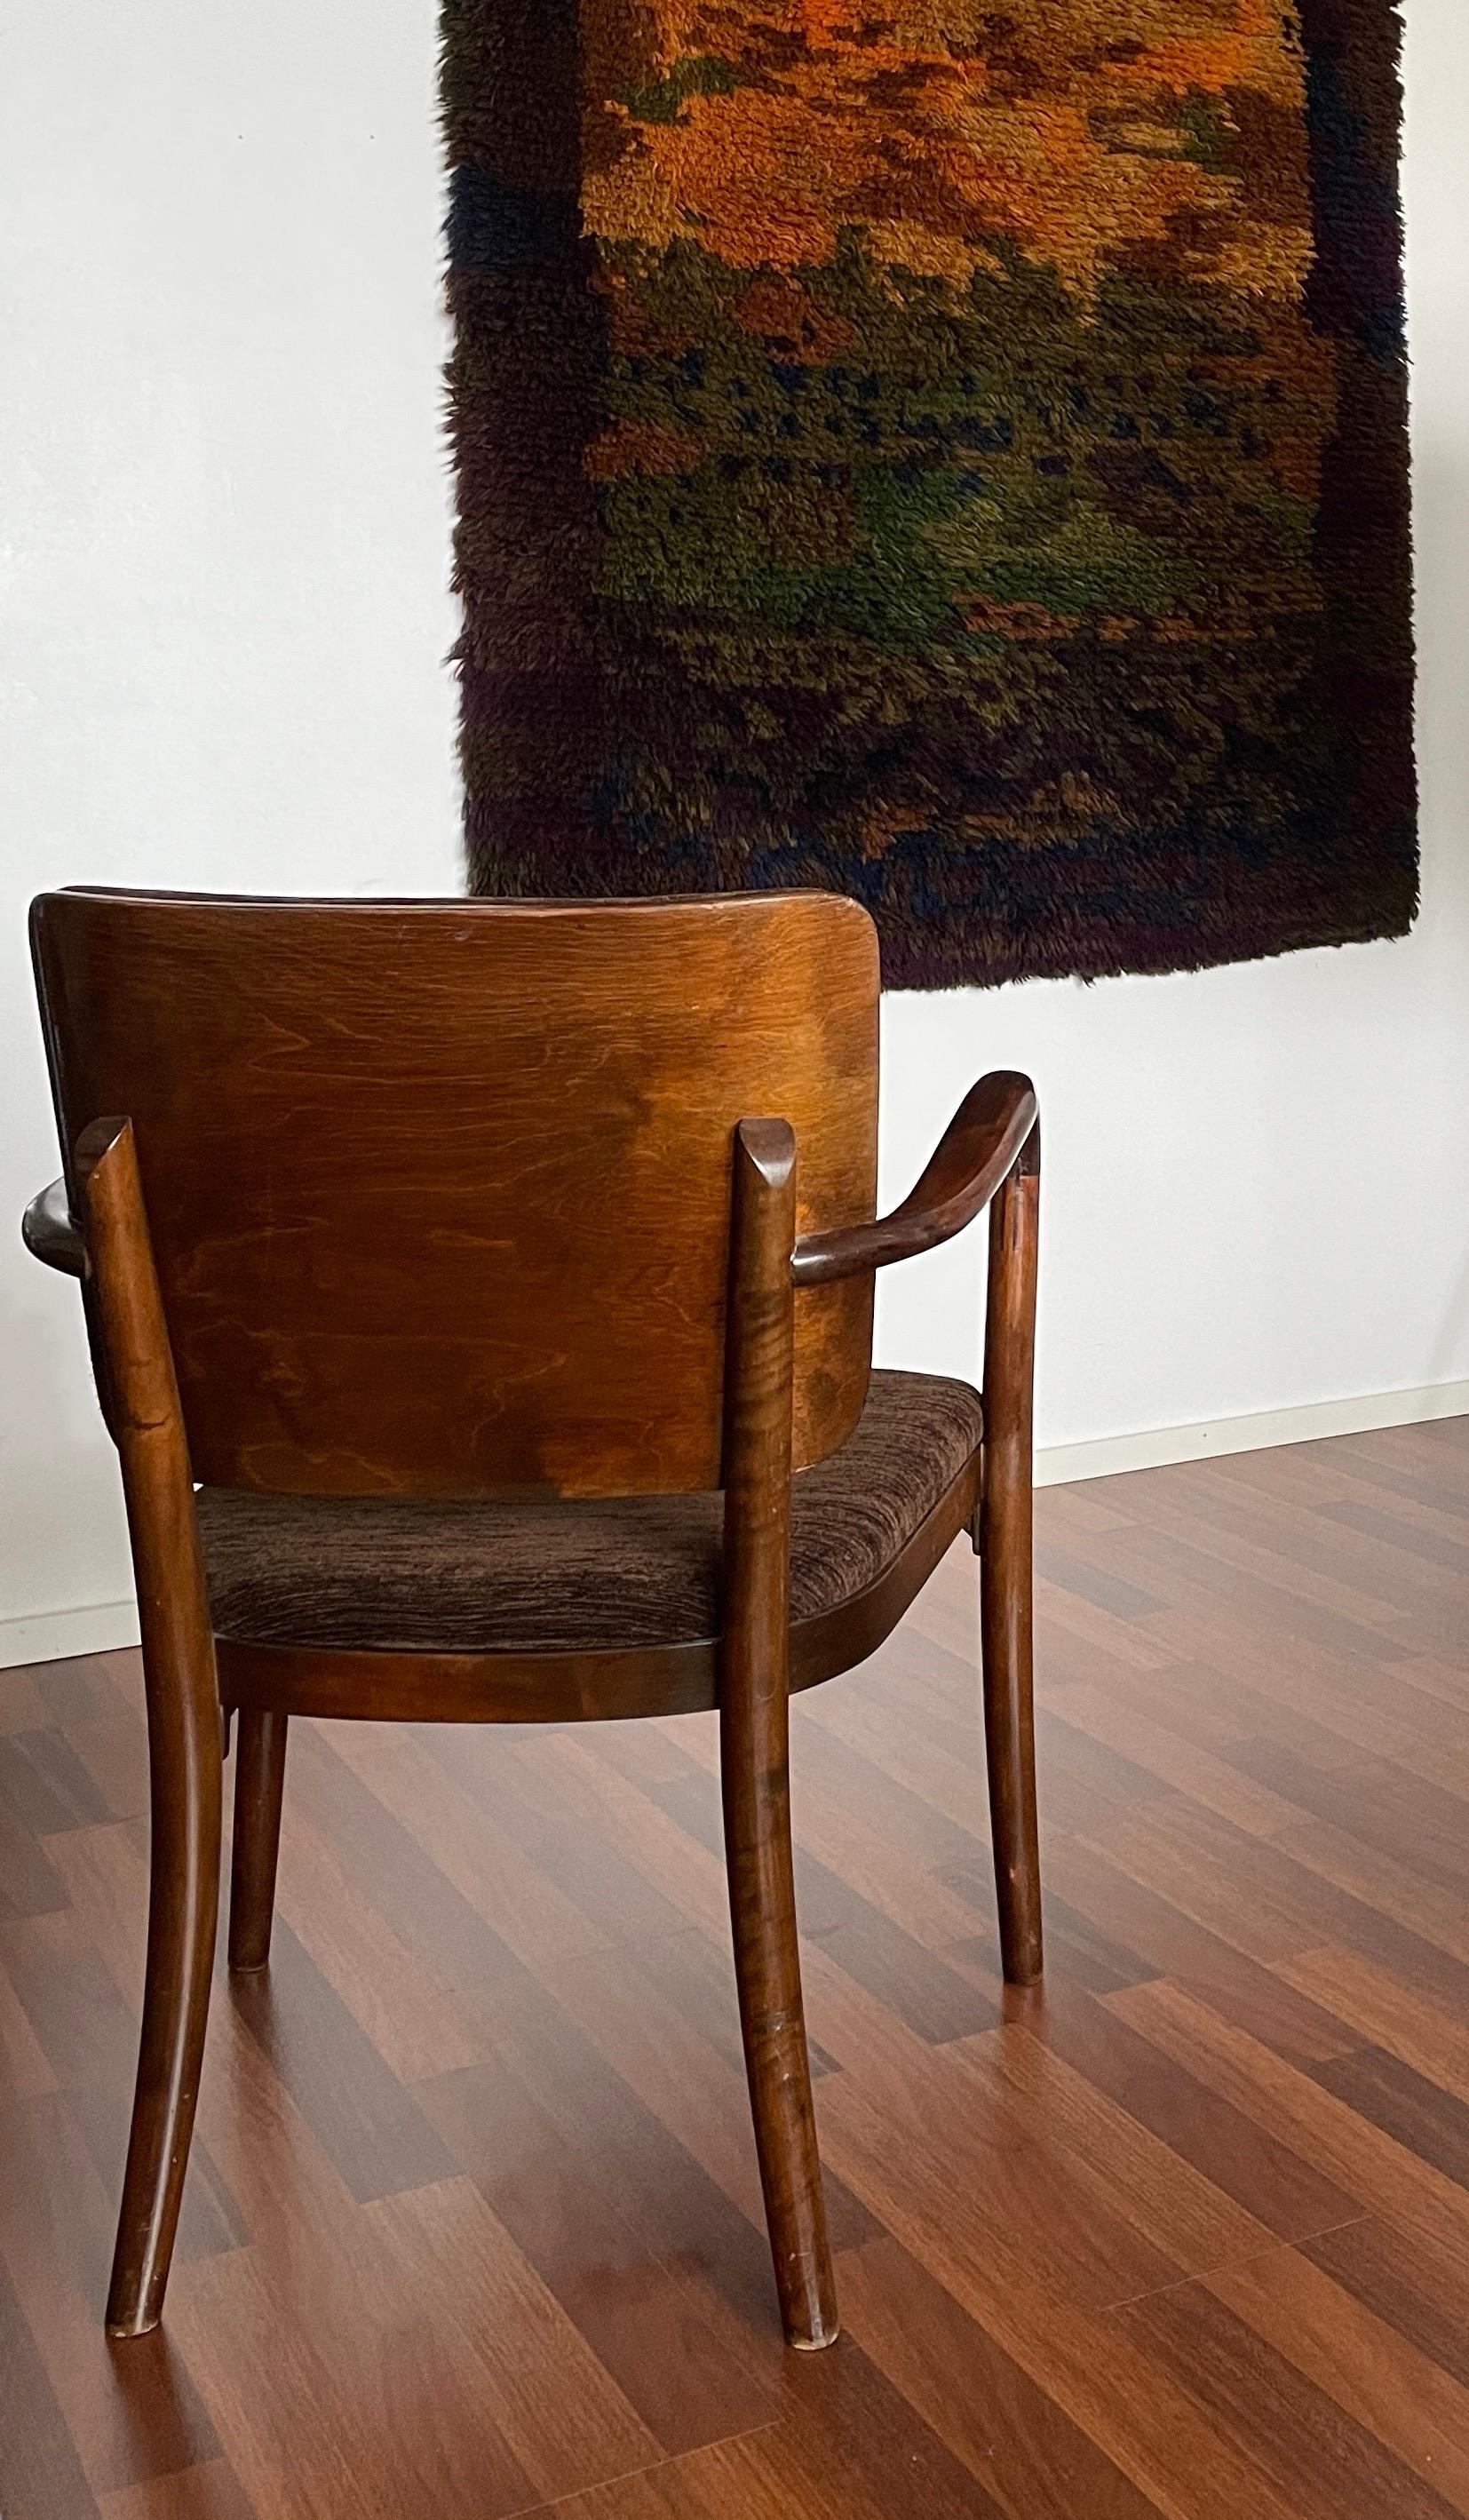 Alvar Aalto Finnish Modern Chair for Wilh Schauman, Finland, 1939 In Good Condition For Sale In Espoo, FI